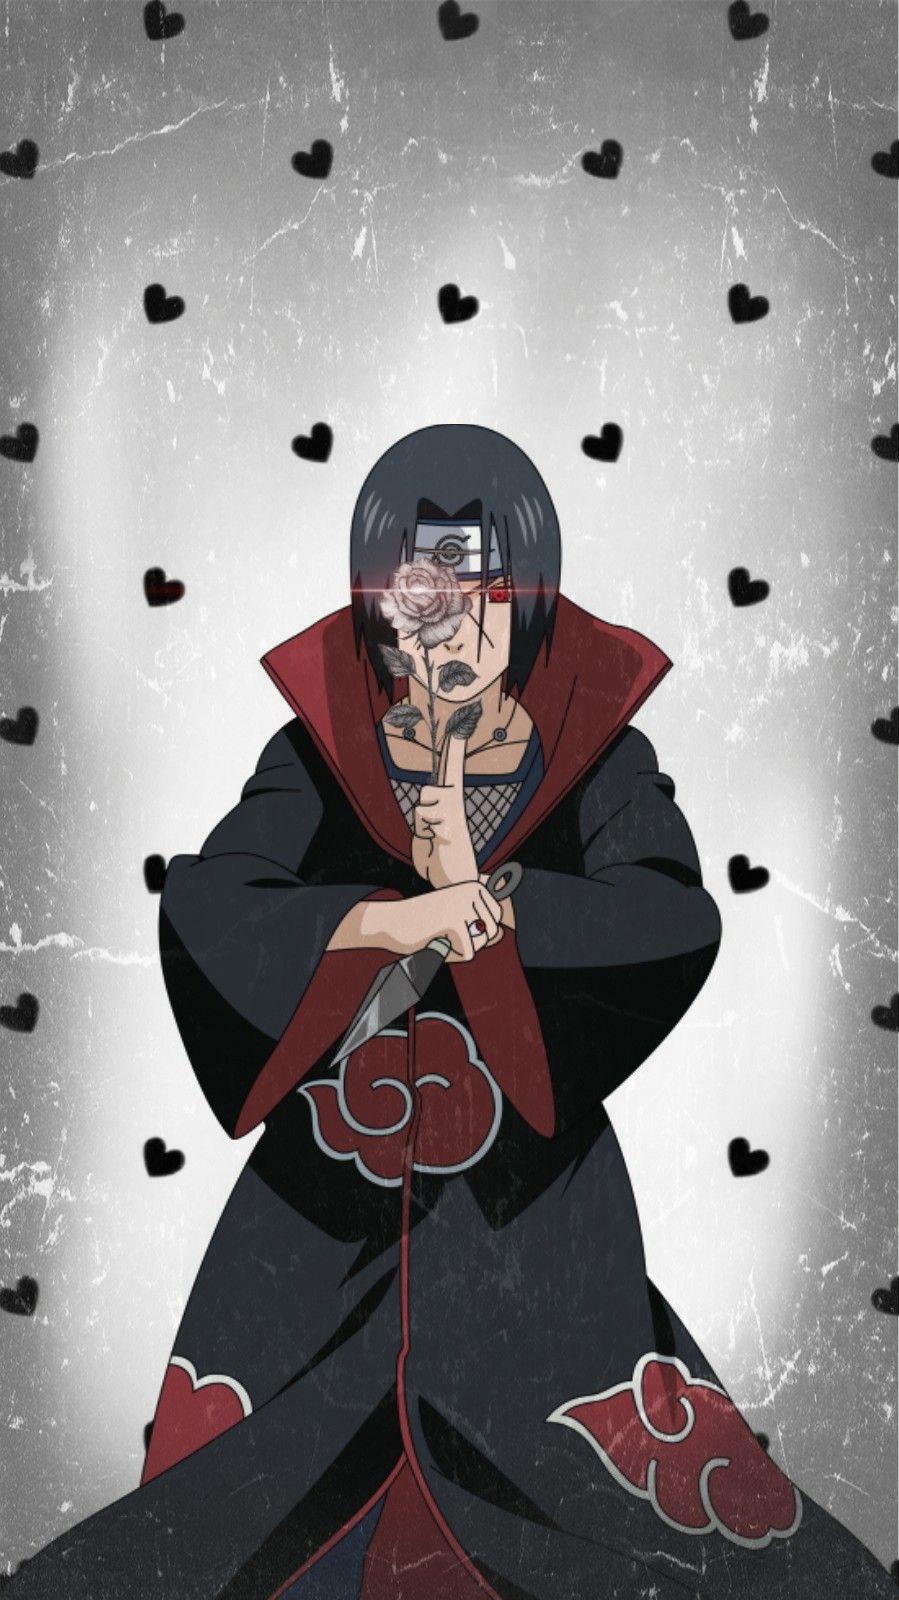 Itachi Wallpaper Anime Best Images Want to discover art related to itachi? itachi wallpaper anime best images